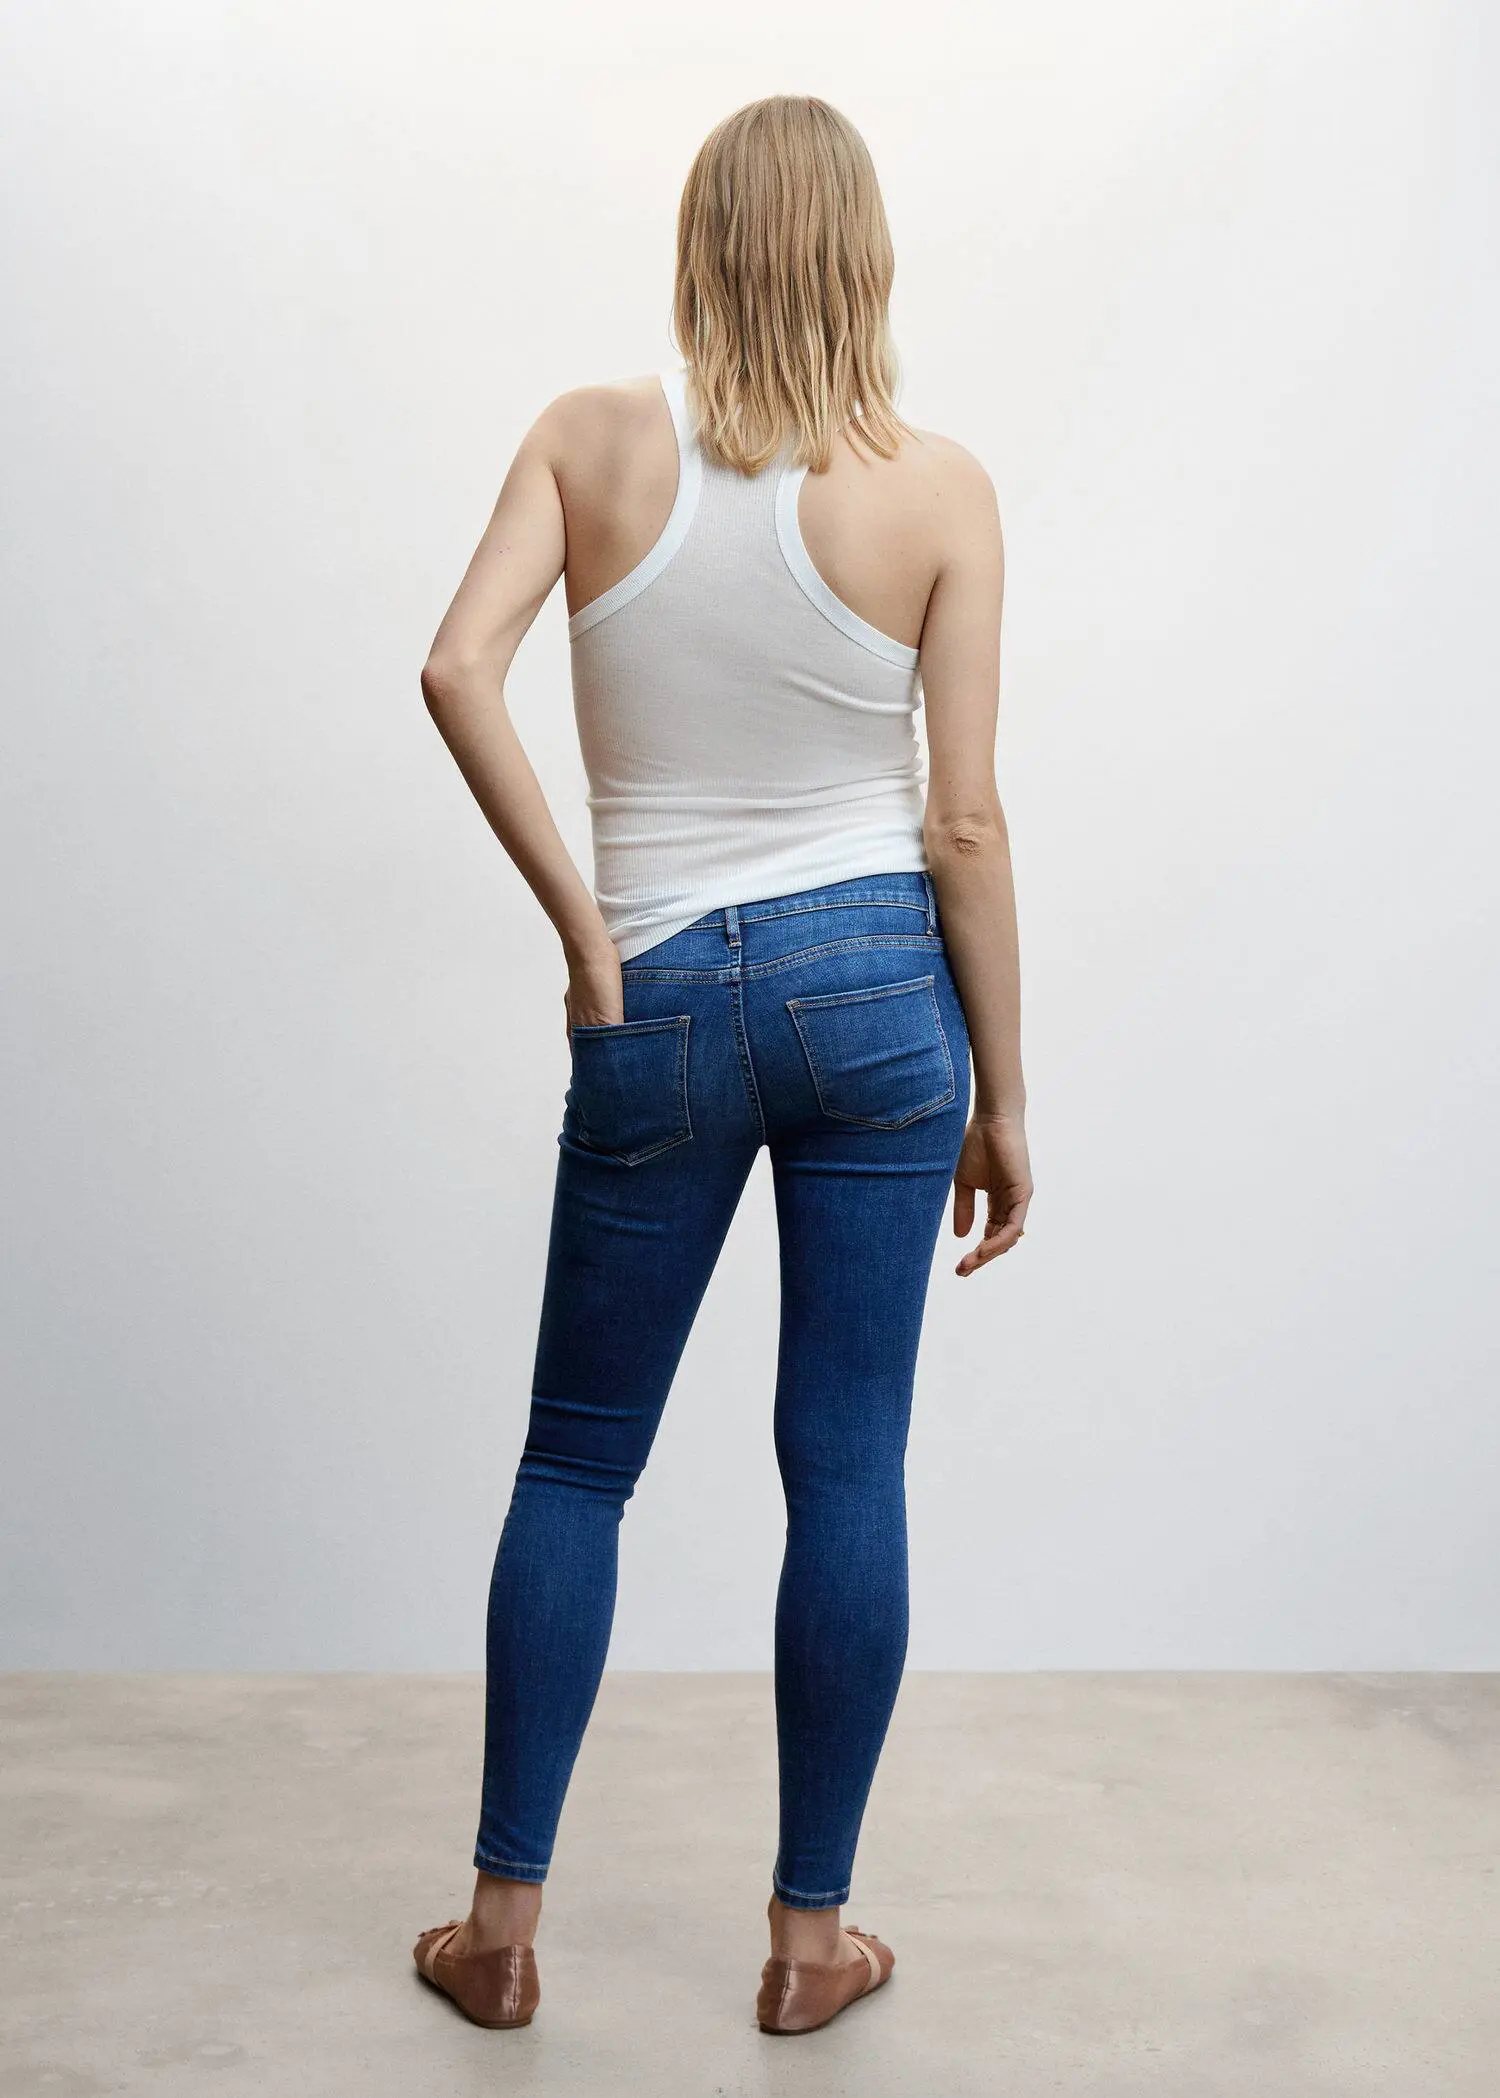 Mango Maternity skinny jeans. a woman wearing a white tank top and blue jeans. 